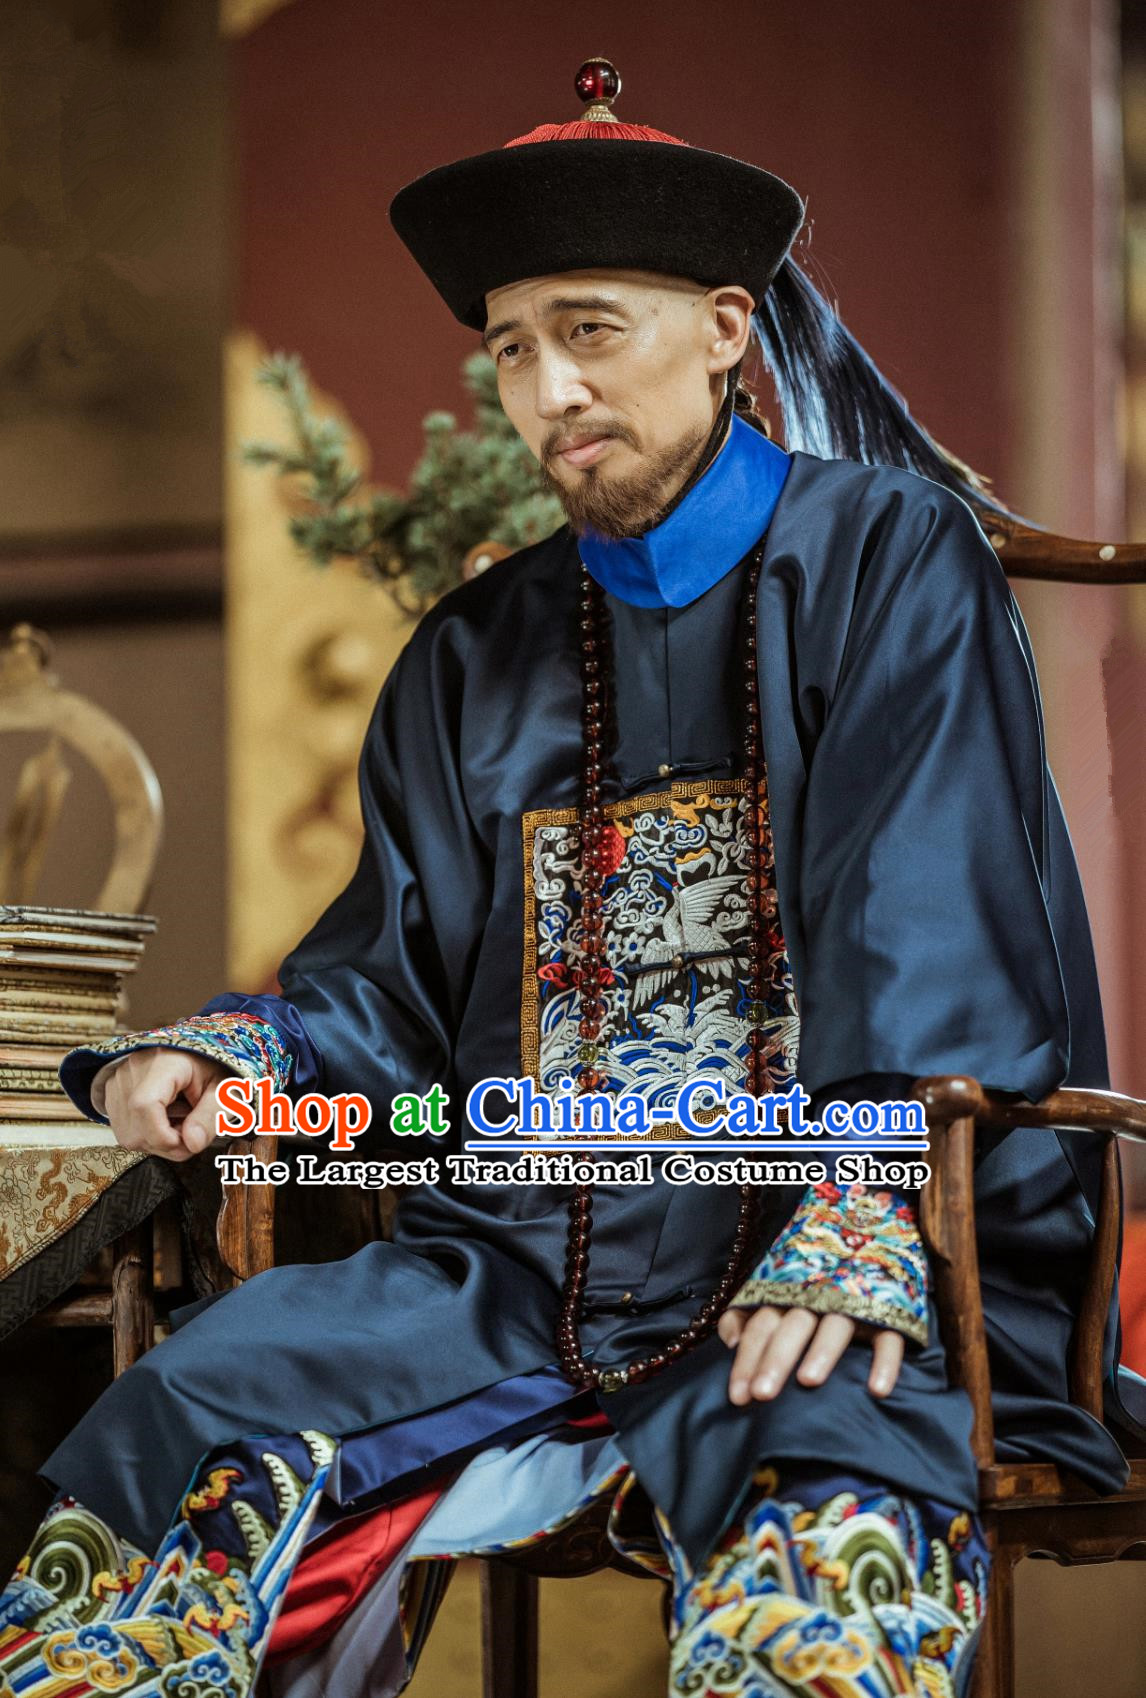 China Ancient Qing Dynasty Official Clothing Historical Drama The Long River Prime Minister Nalan Mingju Garment Costumes